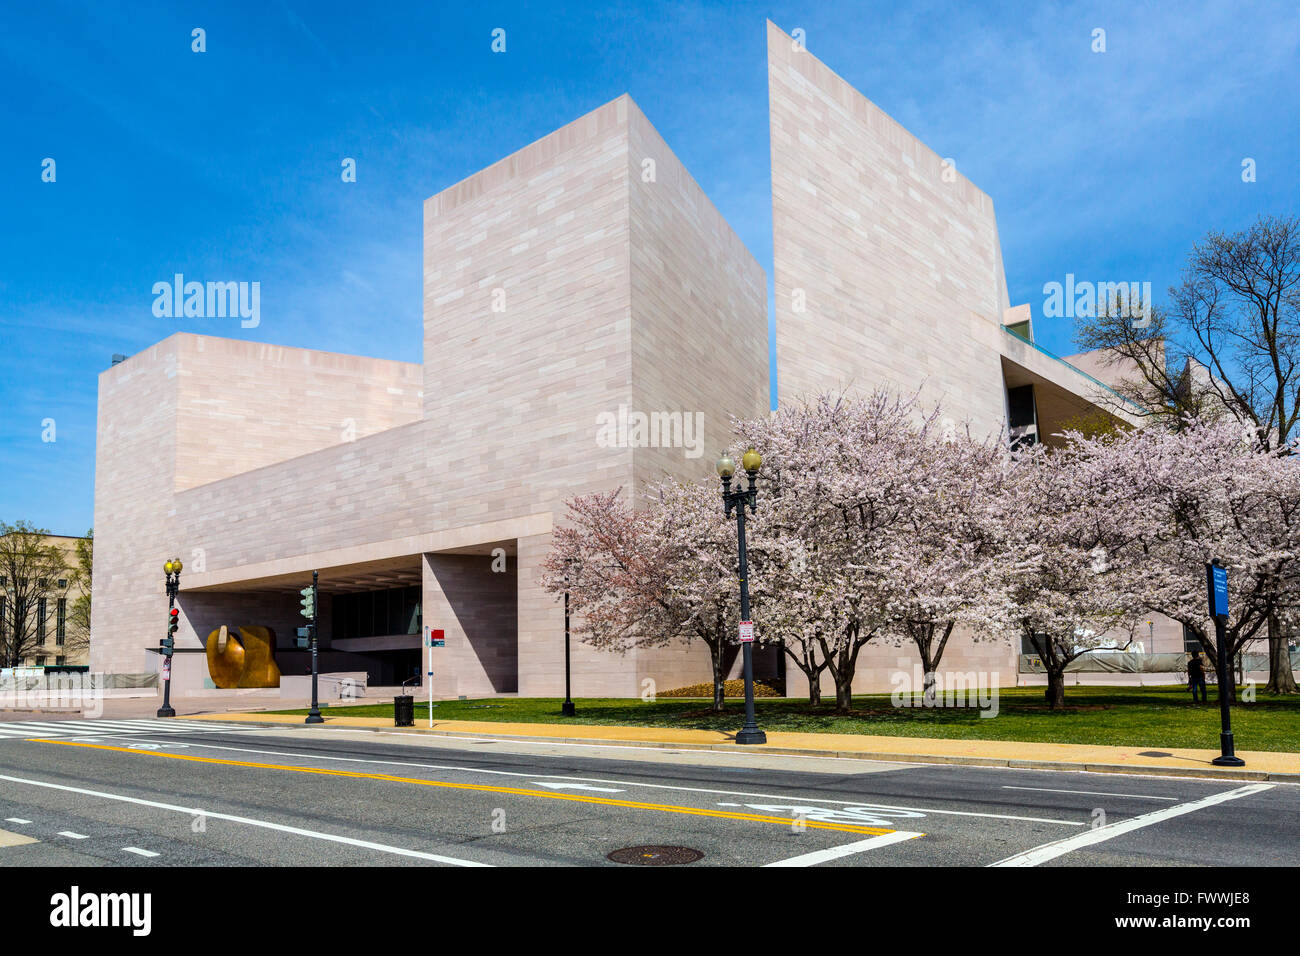 Washington, D.C.  Entrance, East Wing, National Gallery of Art, architect I. M. Pei.  Cherry Trees in Bloom. Stock Photo